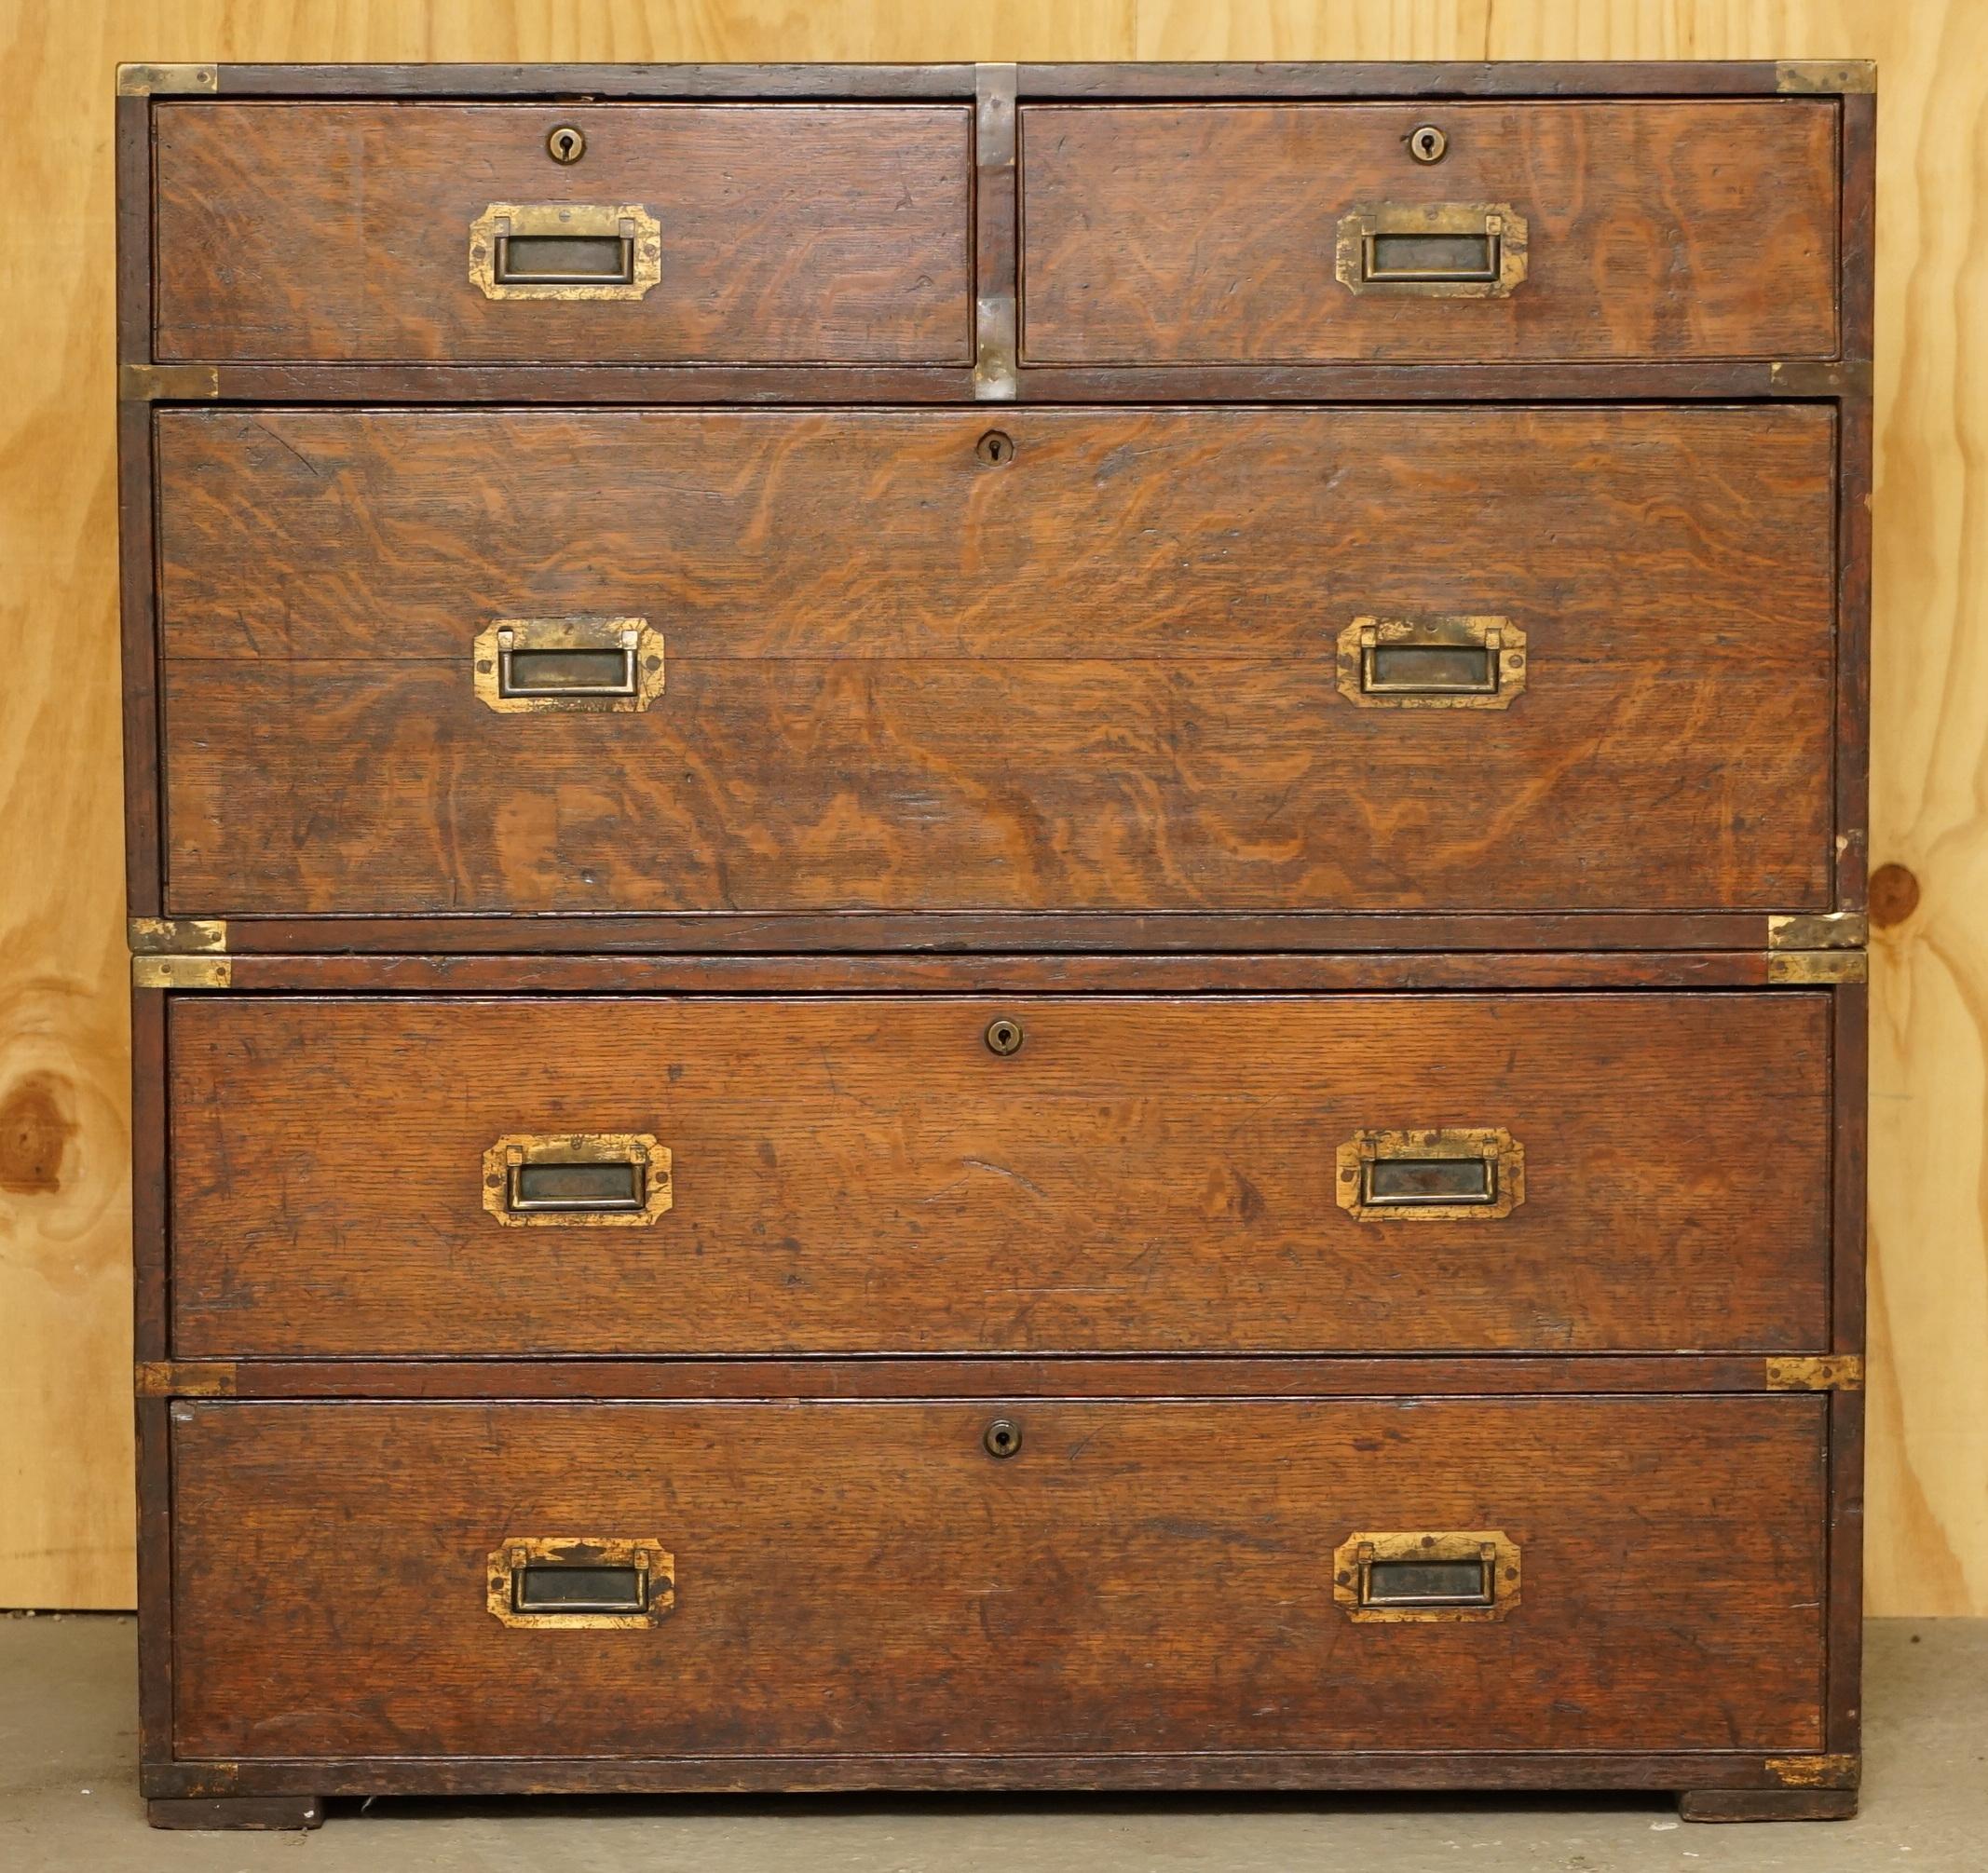 We are delighted to offer for sale this very rare English oak Military chest of drawers campaign used

A very good looking period used piece, the drawers have lots of original period patina as you would expect from military furniture circa 120-140